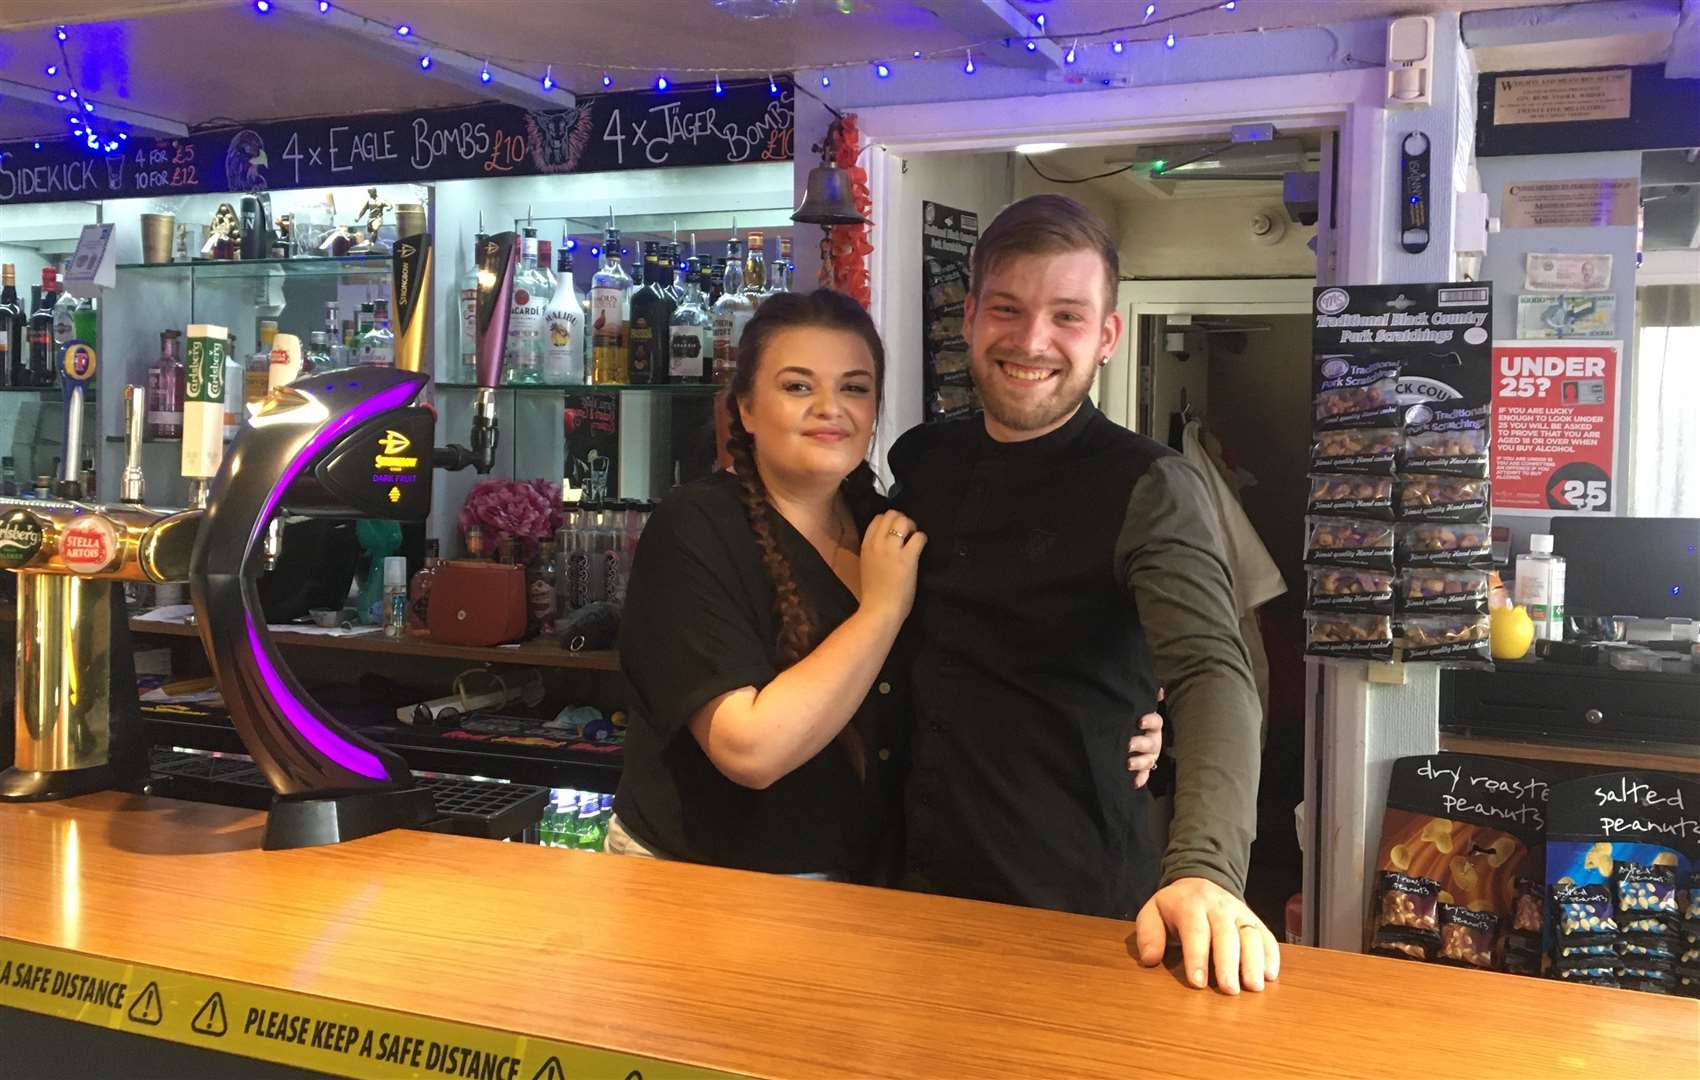 Alex and Adam Weeks behind the bar at The Eagle in Maidstone